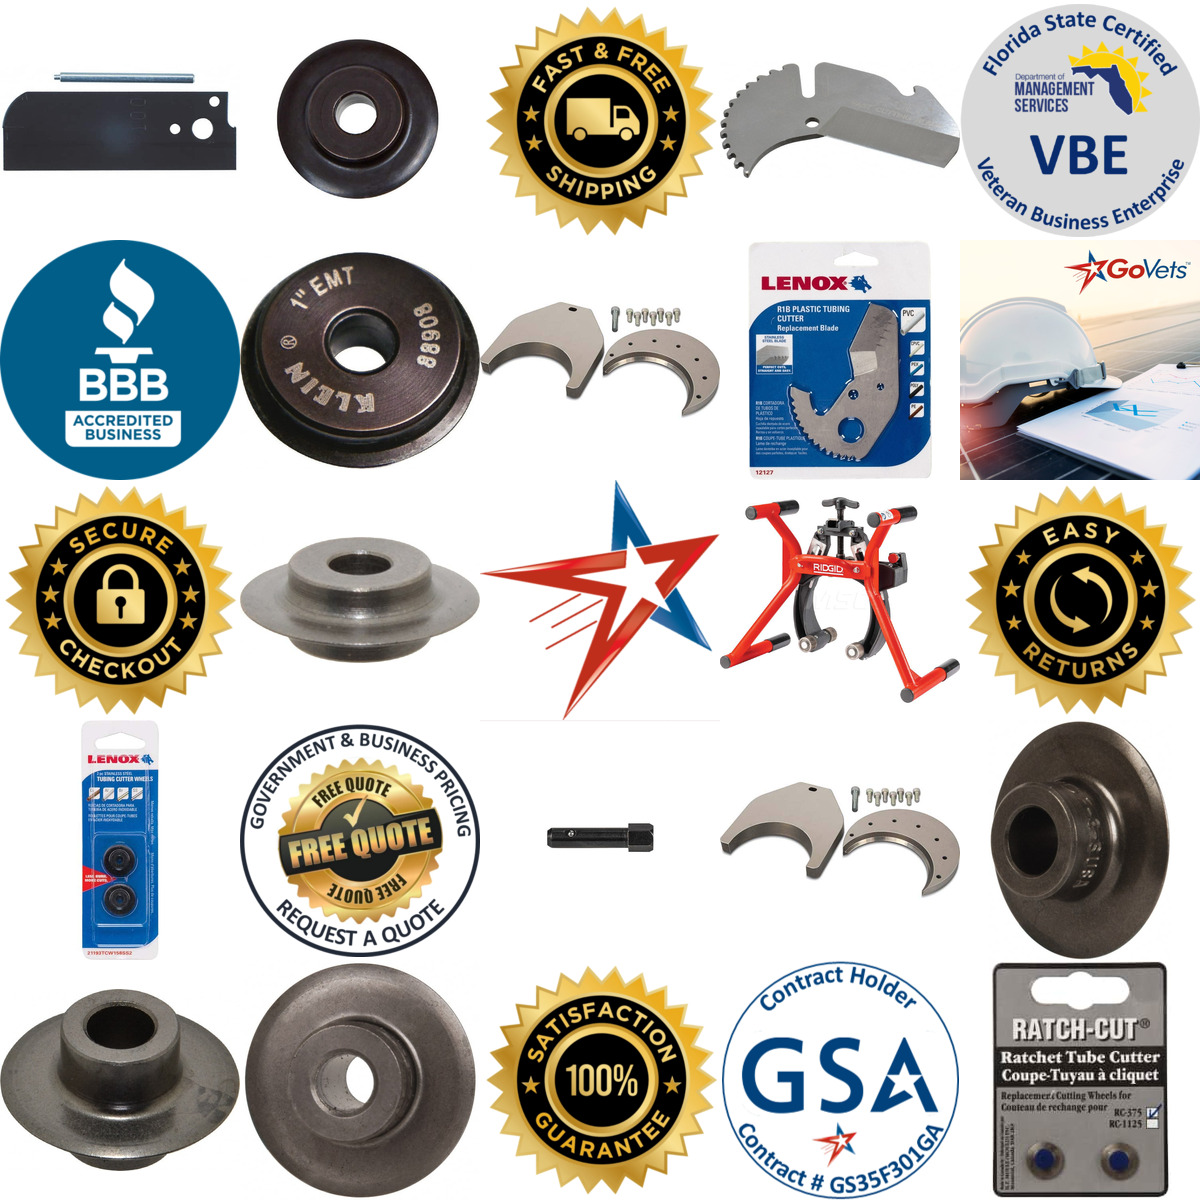 A selection of Cutter Replacement Parts products on GoVets